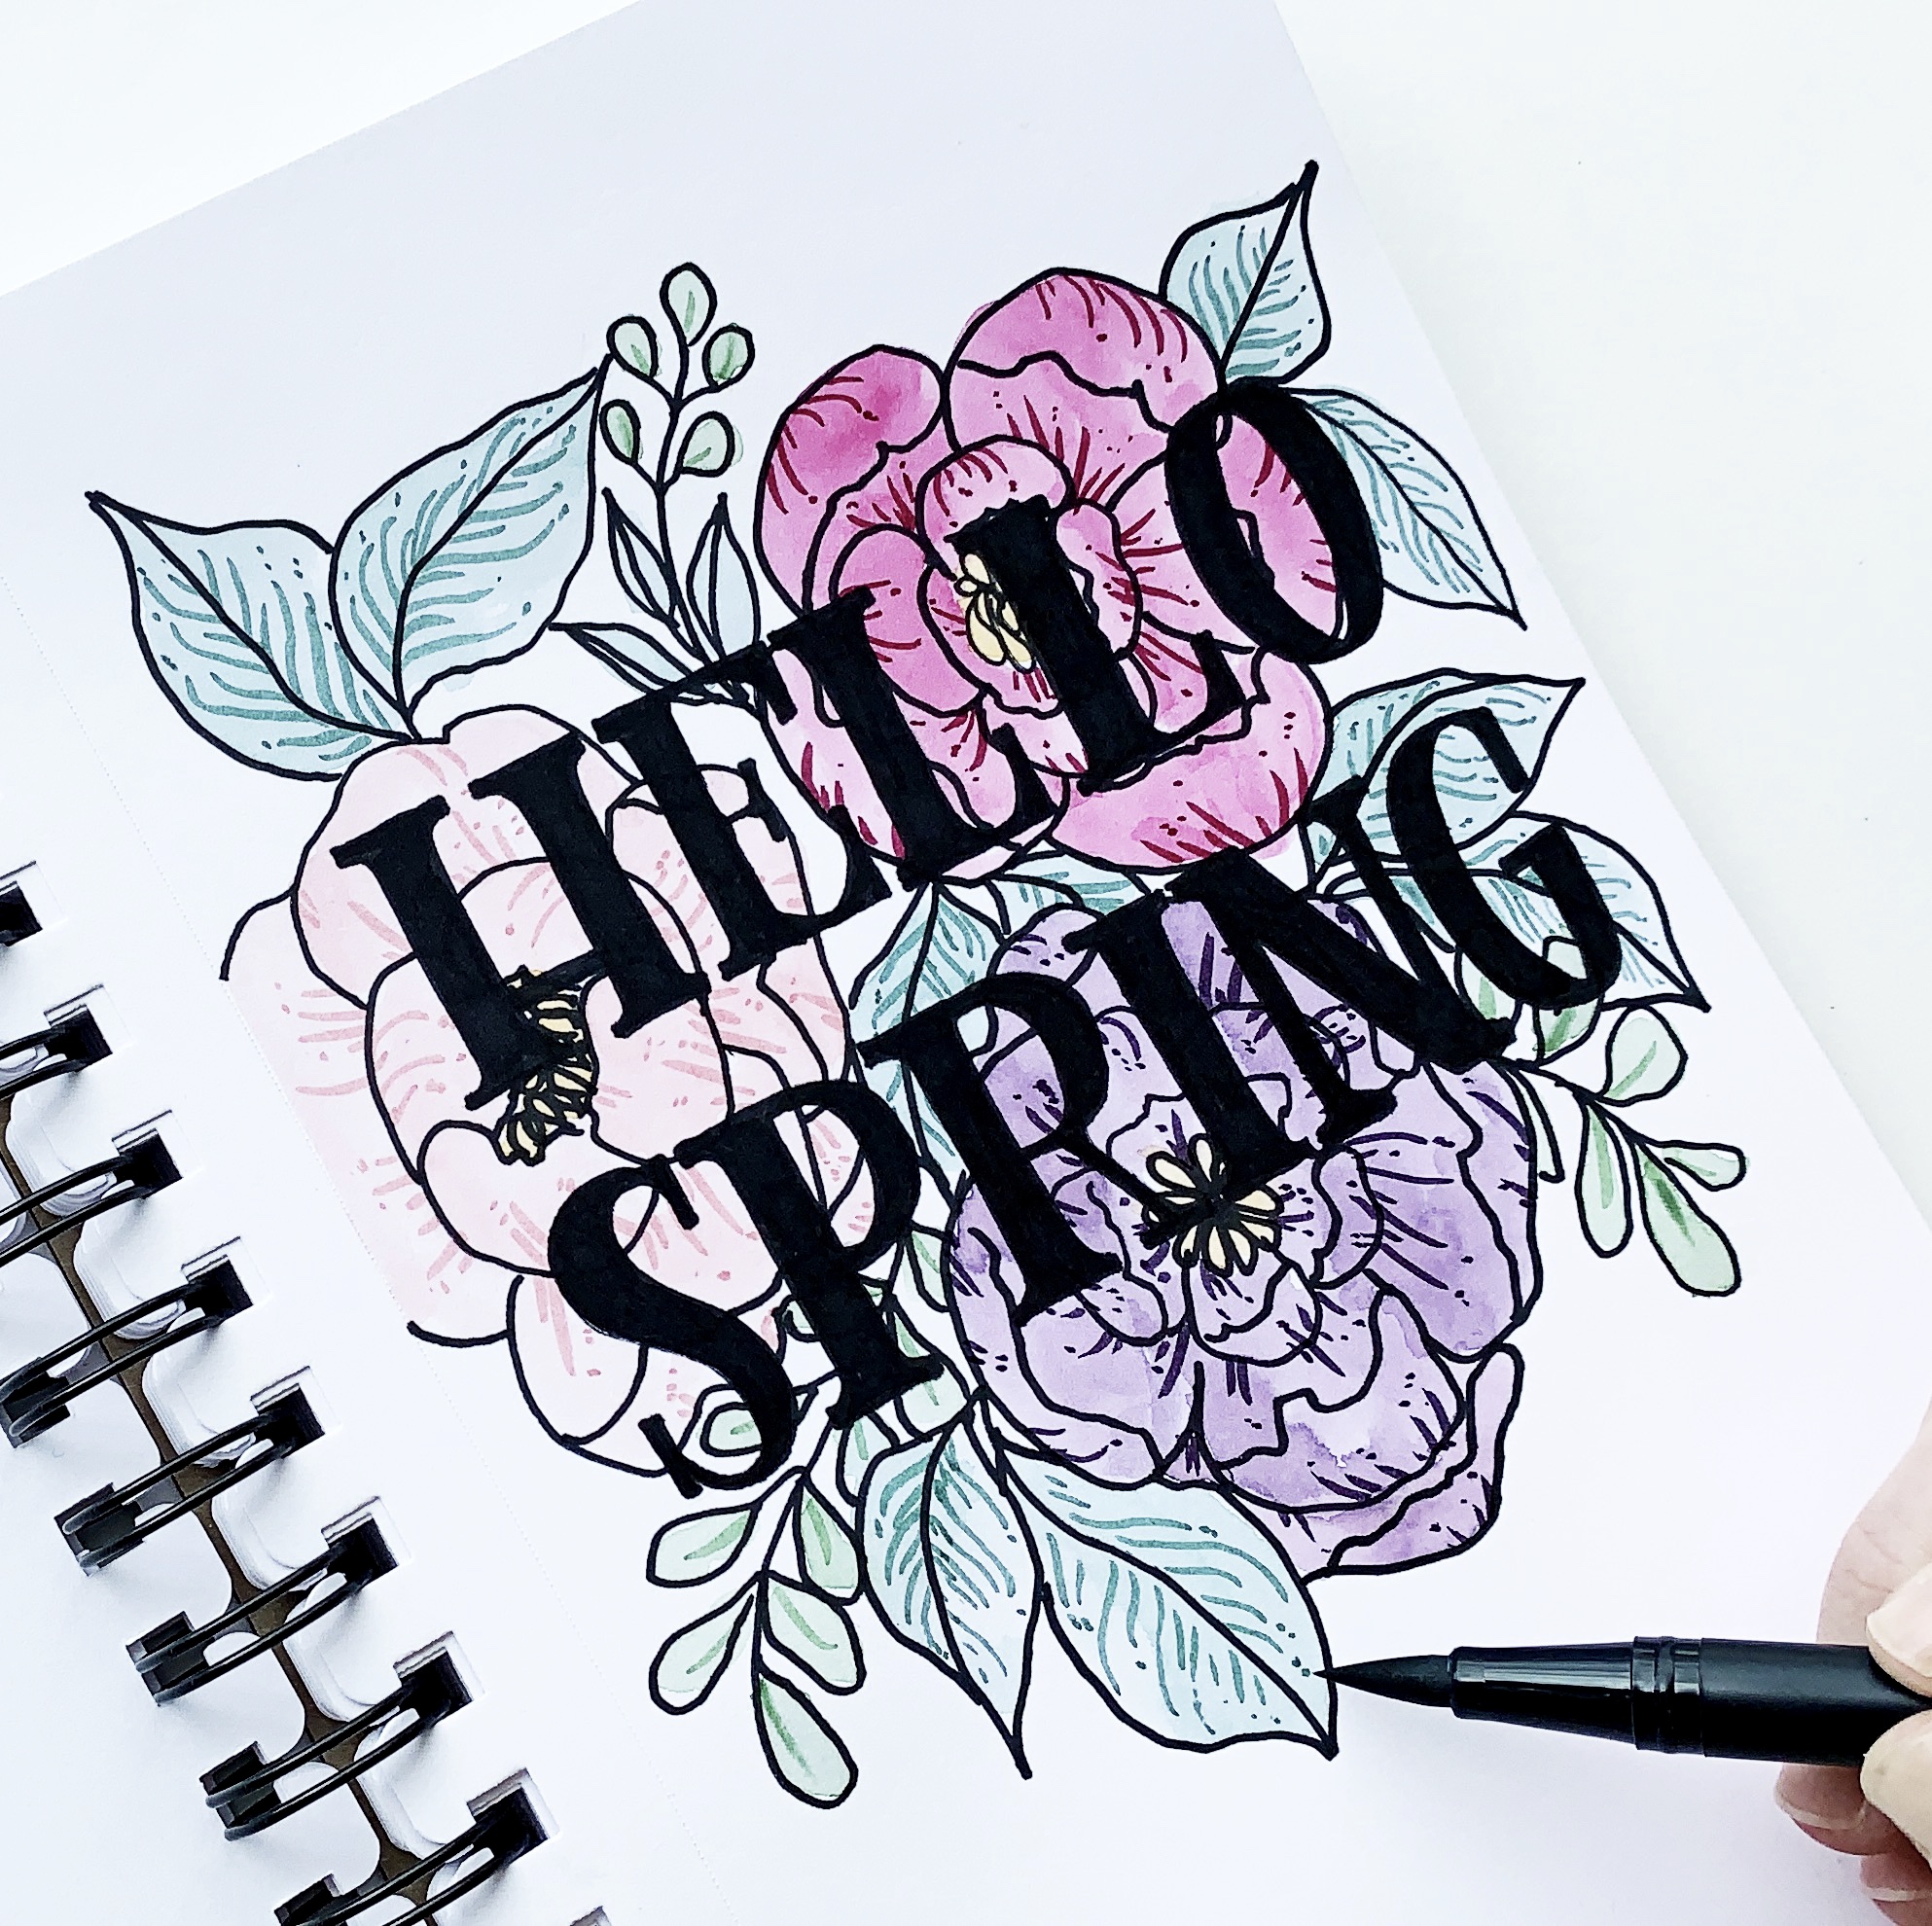 Learn how to create a spring-inspired watercolor illustration with Adrienne from @studio80design!